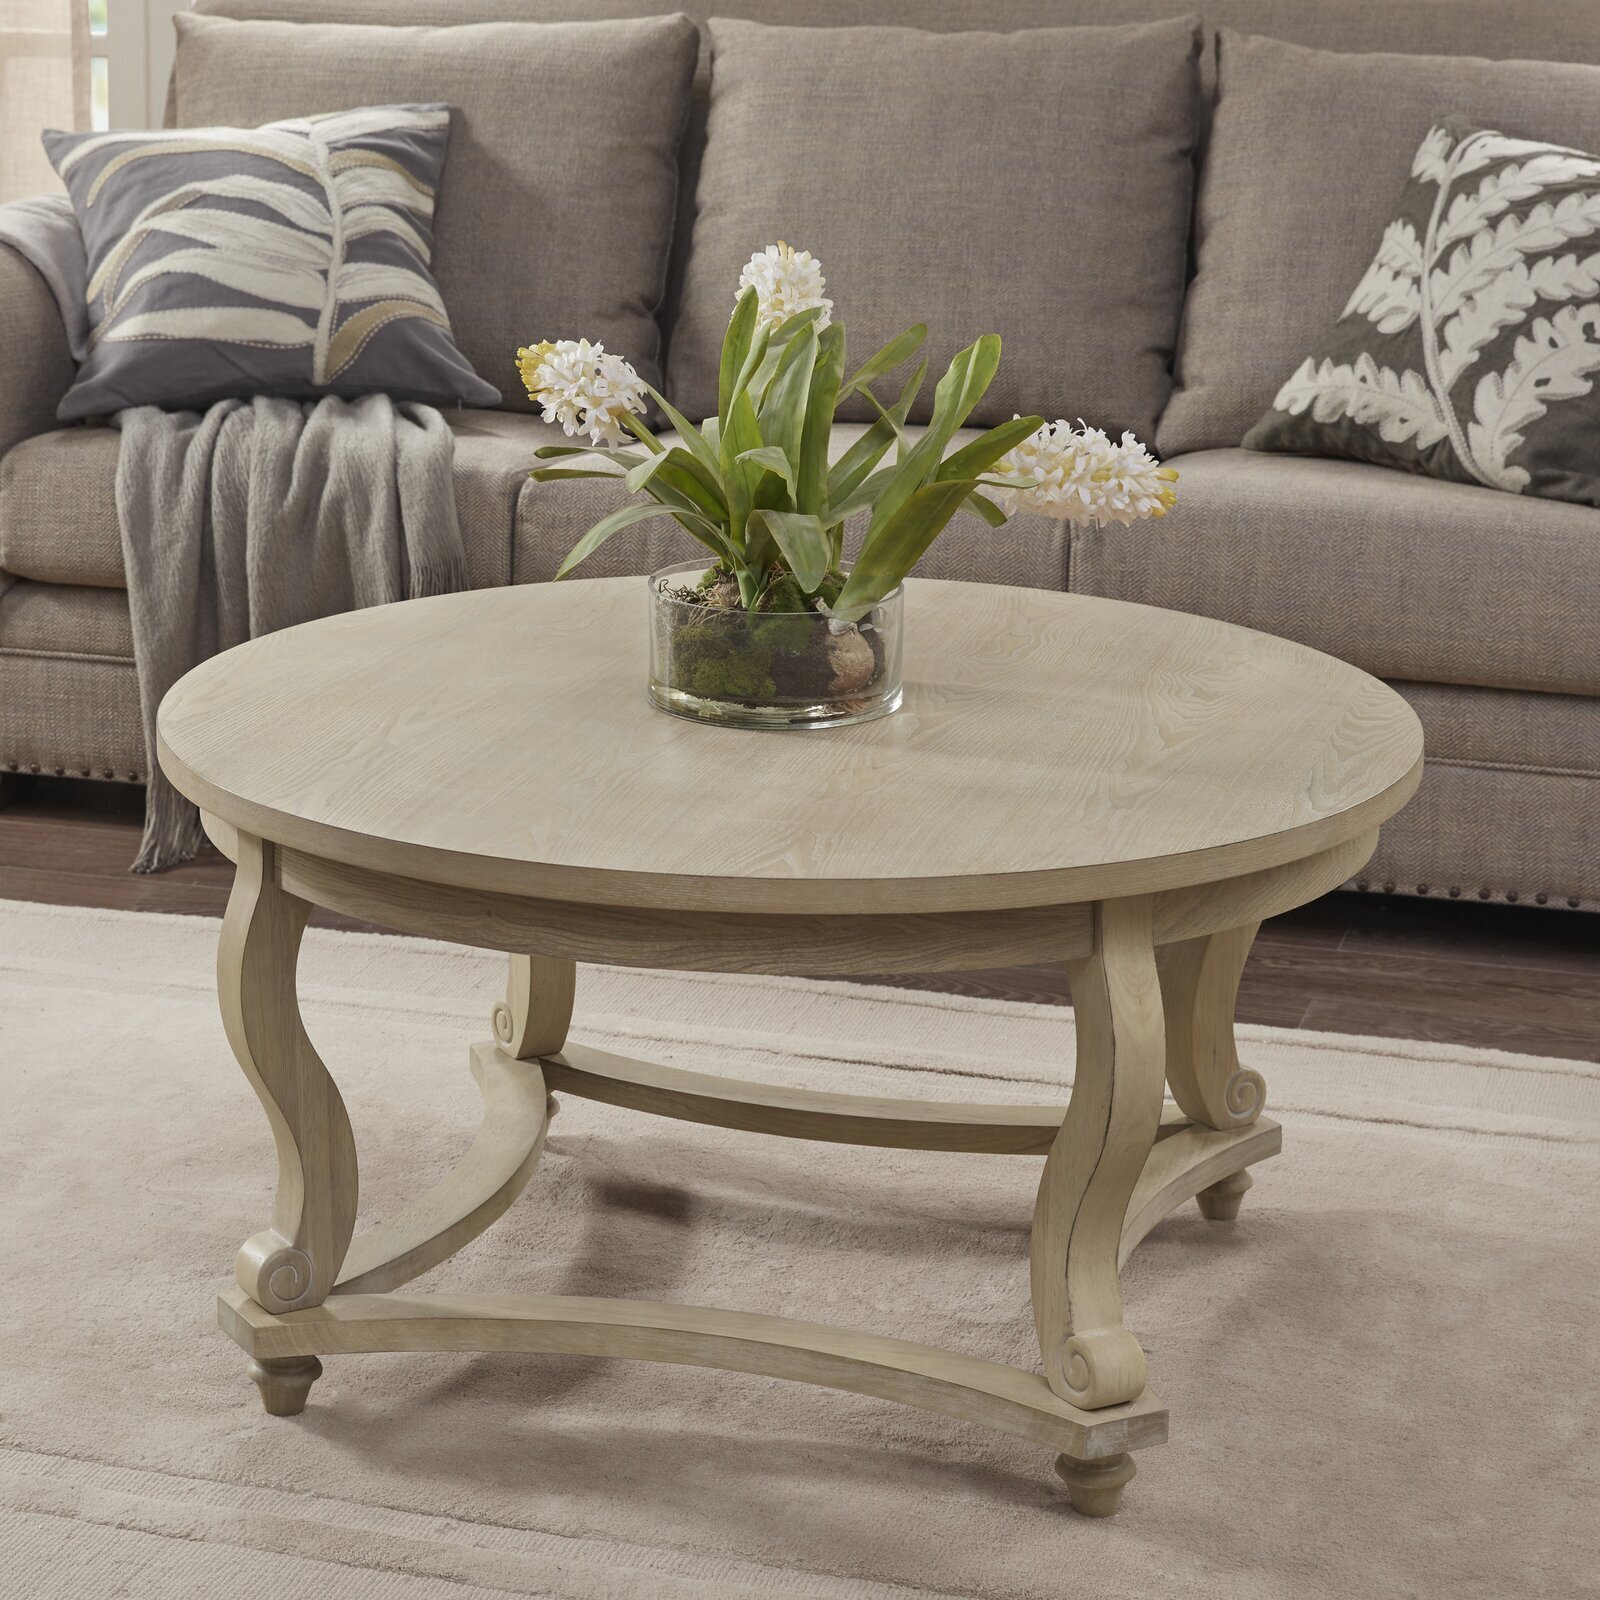 Shabby chic round coffee table